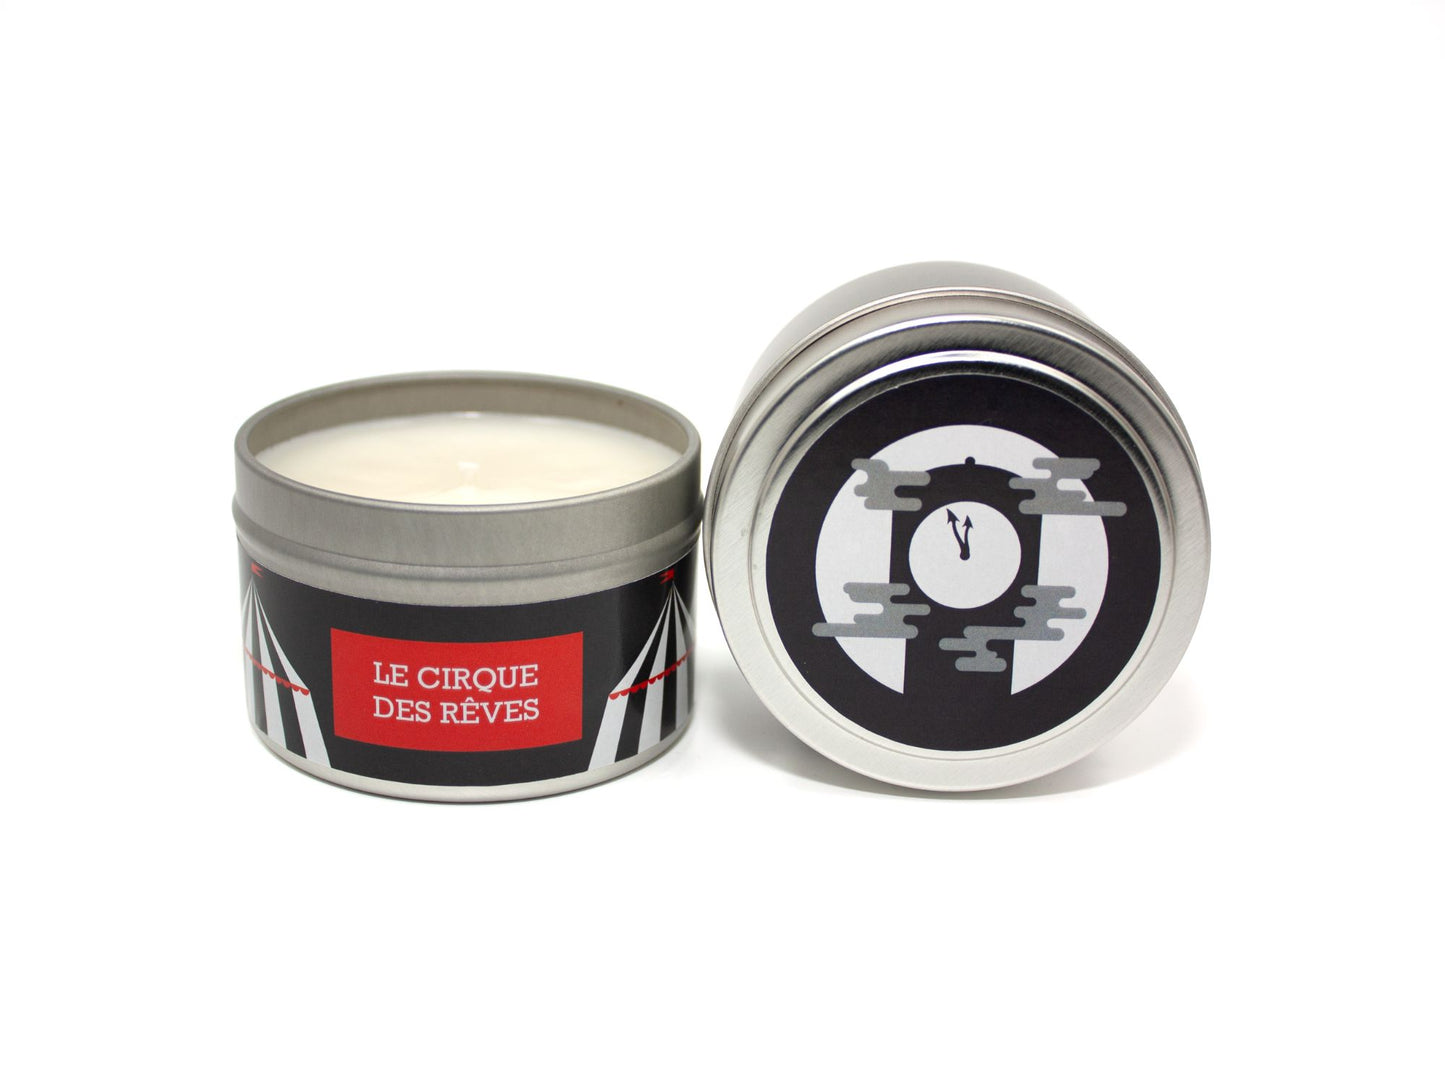 Onset & Rime caramel apple and fall air scented candle called "Le Cirque des Rêves" in a 4 oz silver tin. The circular label on top has a black background with black and white circus tents and a clock in front of a full moon. The text on the front label is "Le Cirque des Rêves - Apple, Caramel, Fallen Leaves, Bonfire".